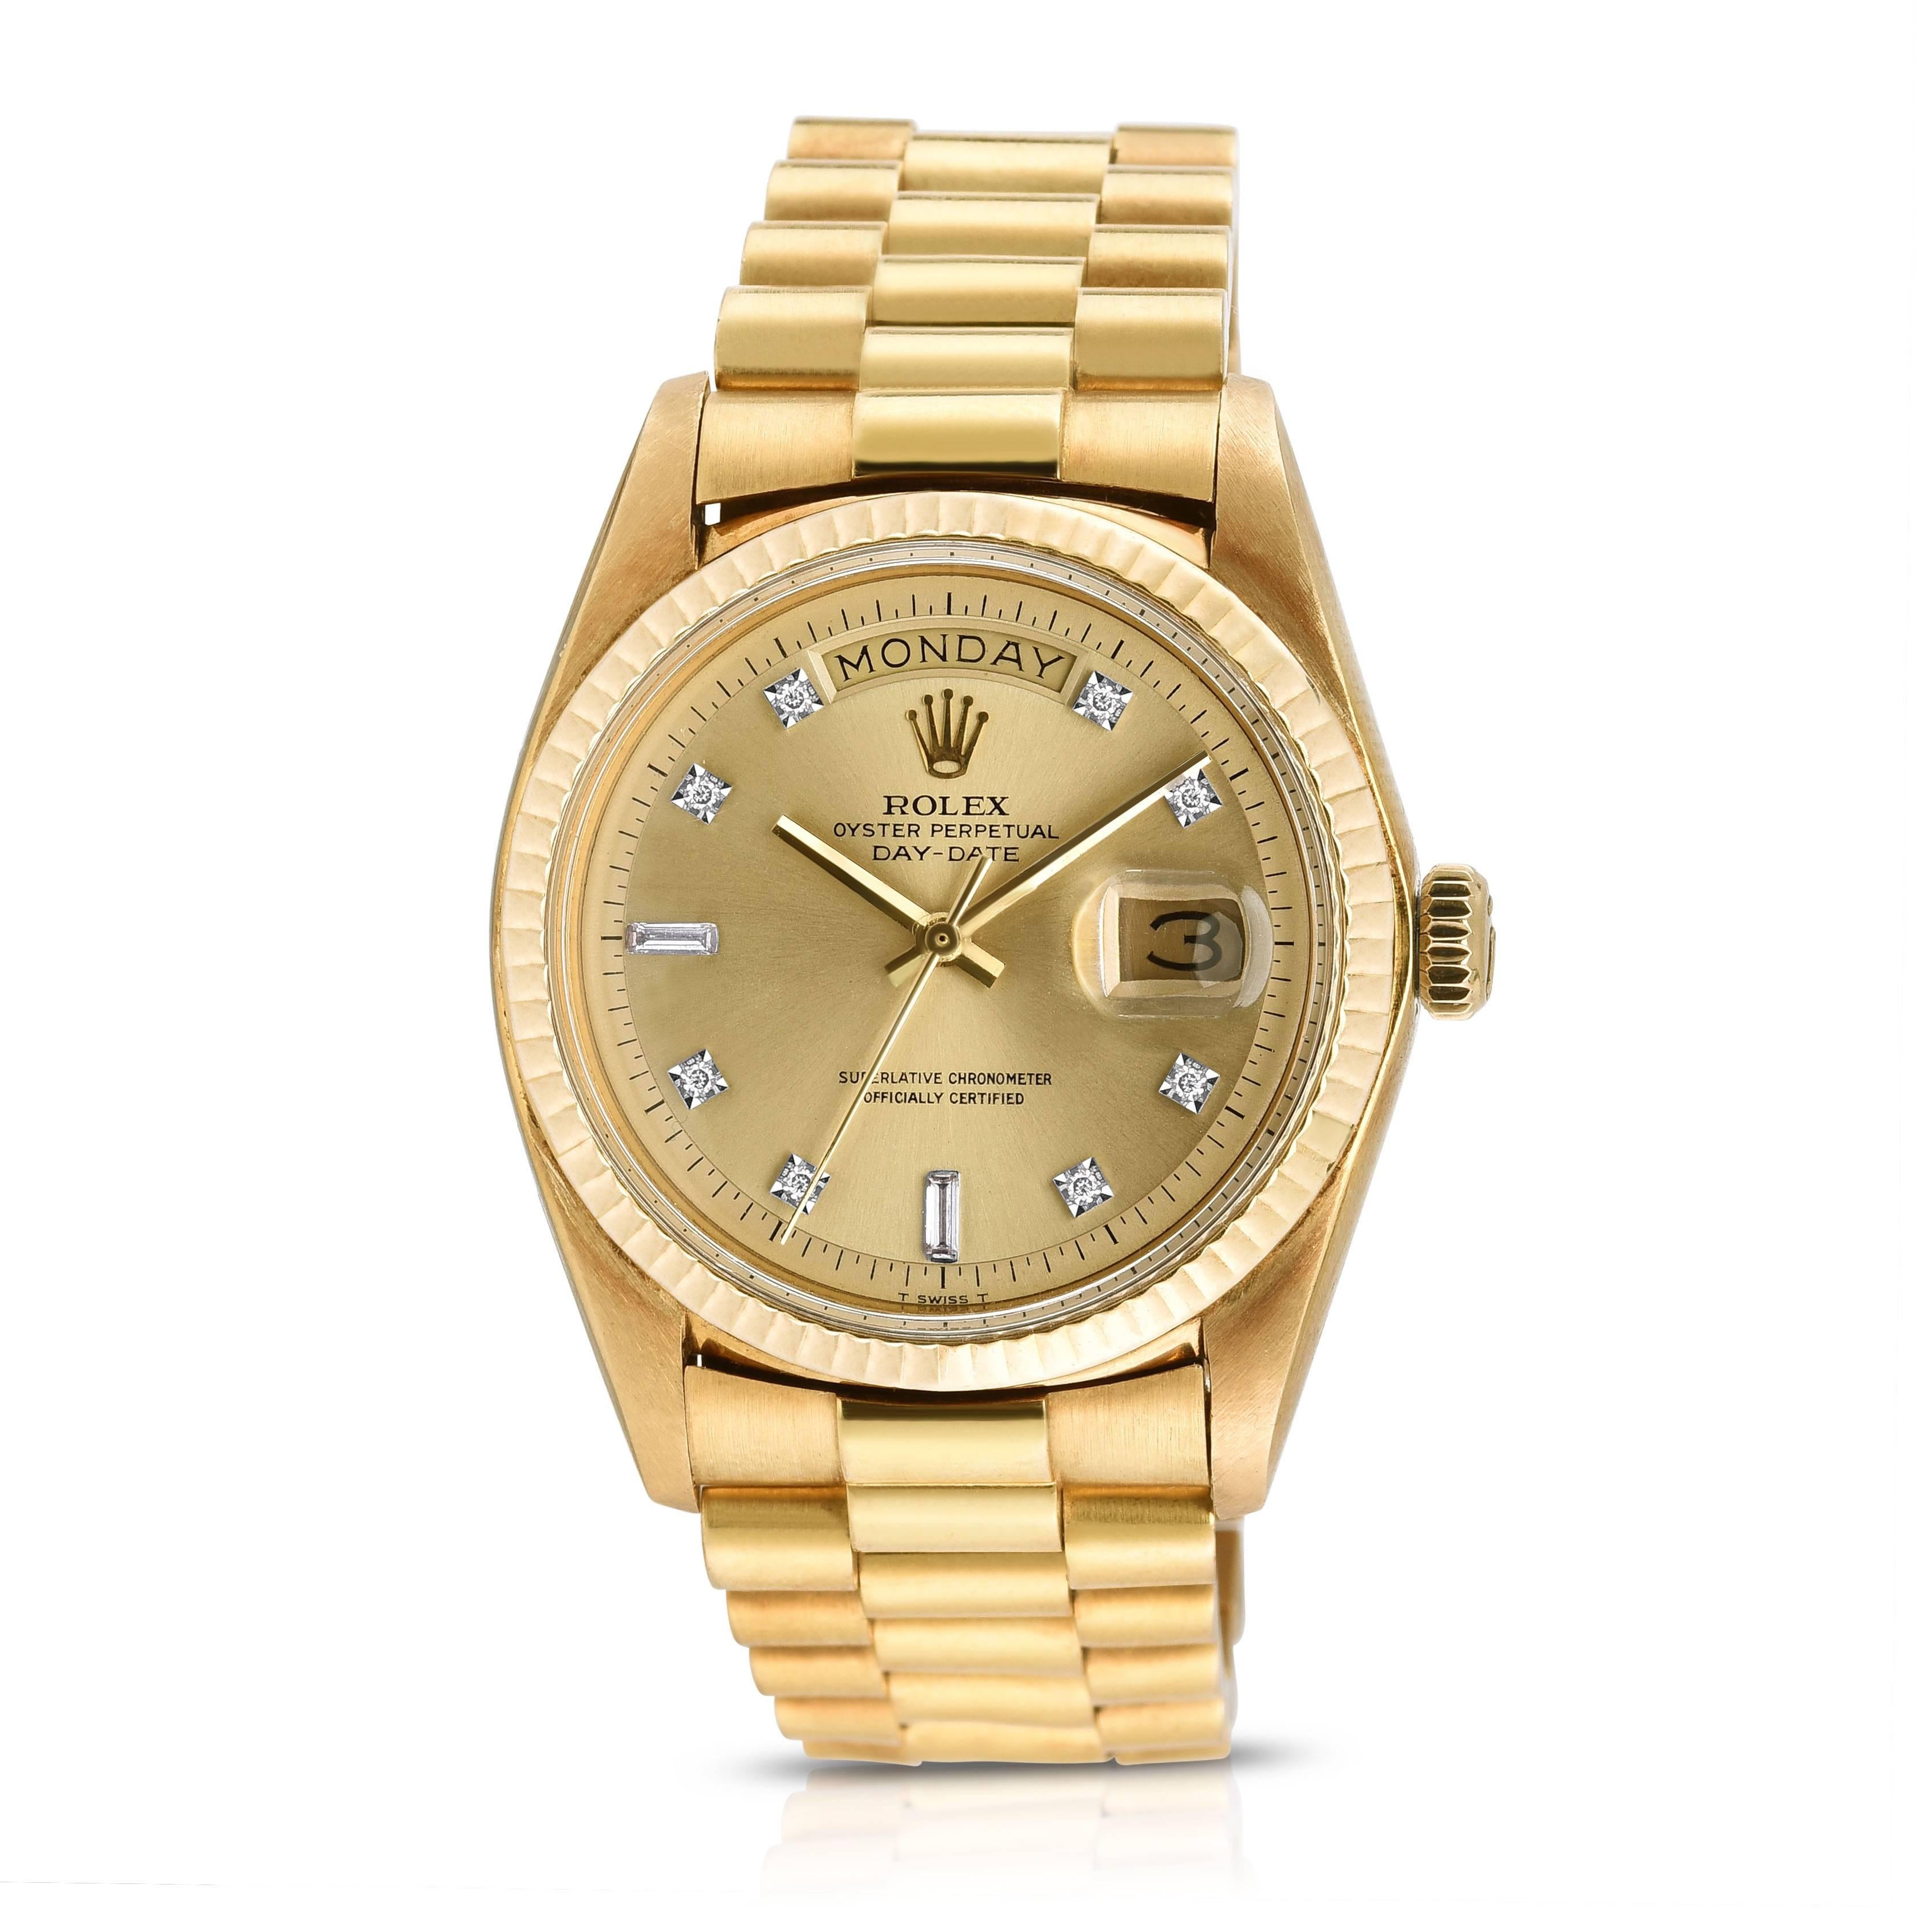 Vintage Rolex Oyster Perpetual Day-Date President
Rare Factory Champagne Diamond Dial with Non-Luminous Markers
36mm in size Solid 18K Yellow Gold Case 
Fluted 18K Yellow Gold Bezel 
Date function at three o'clock 
1971 Production
Factory 18K